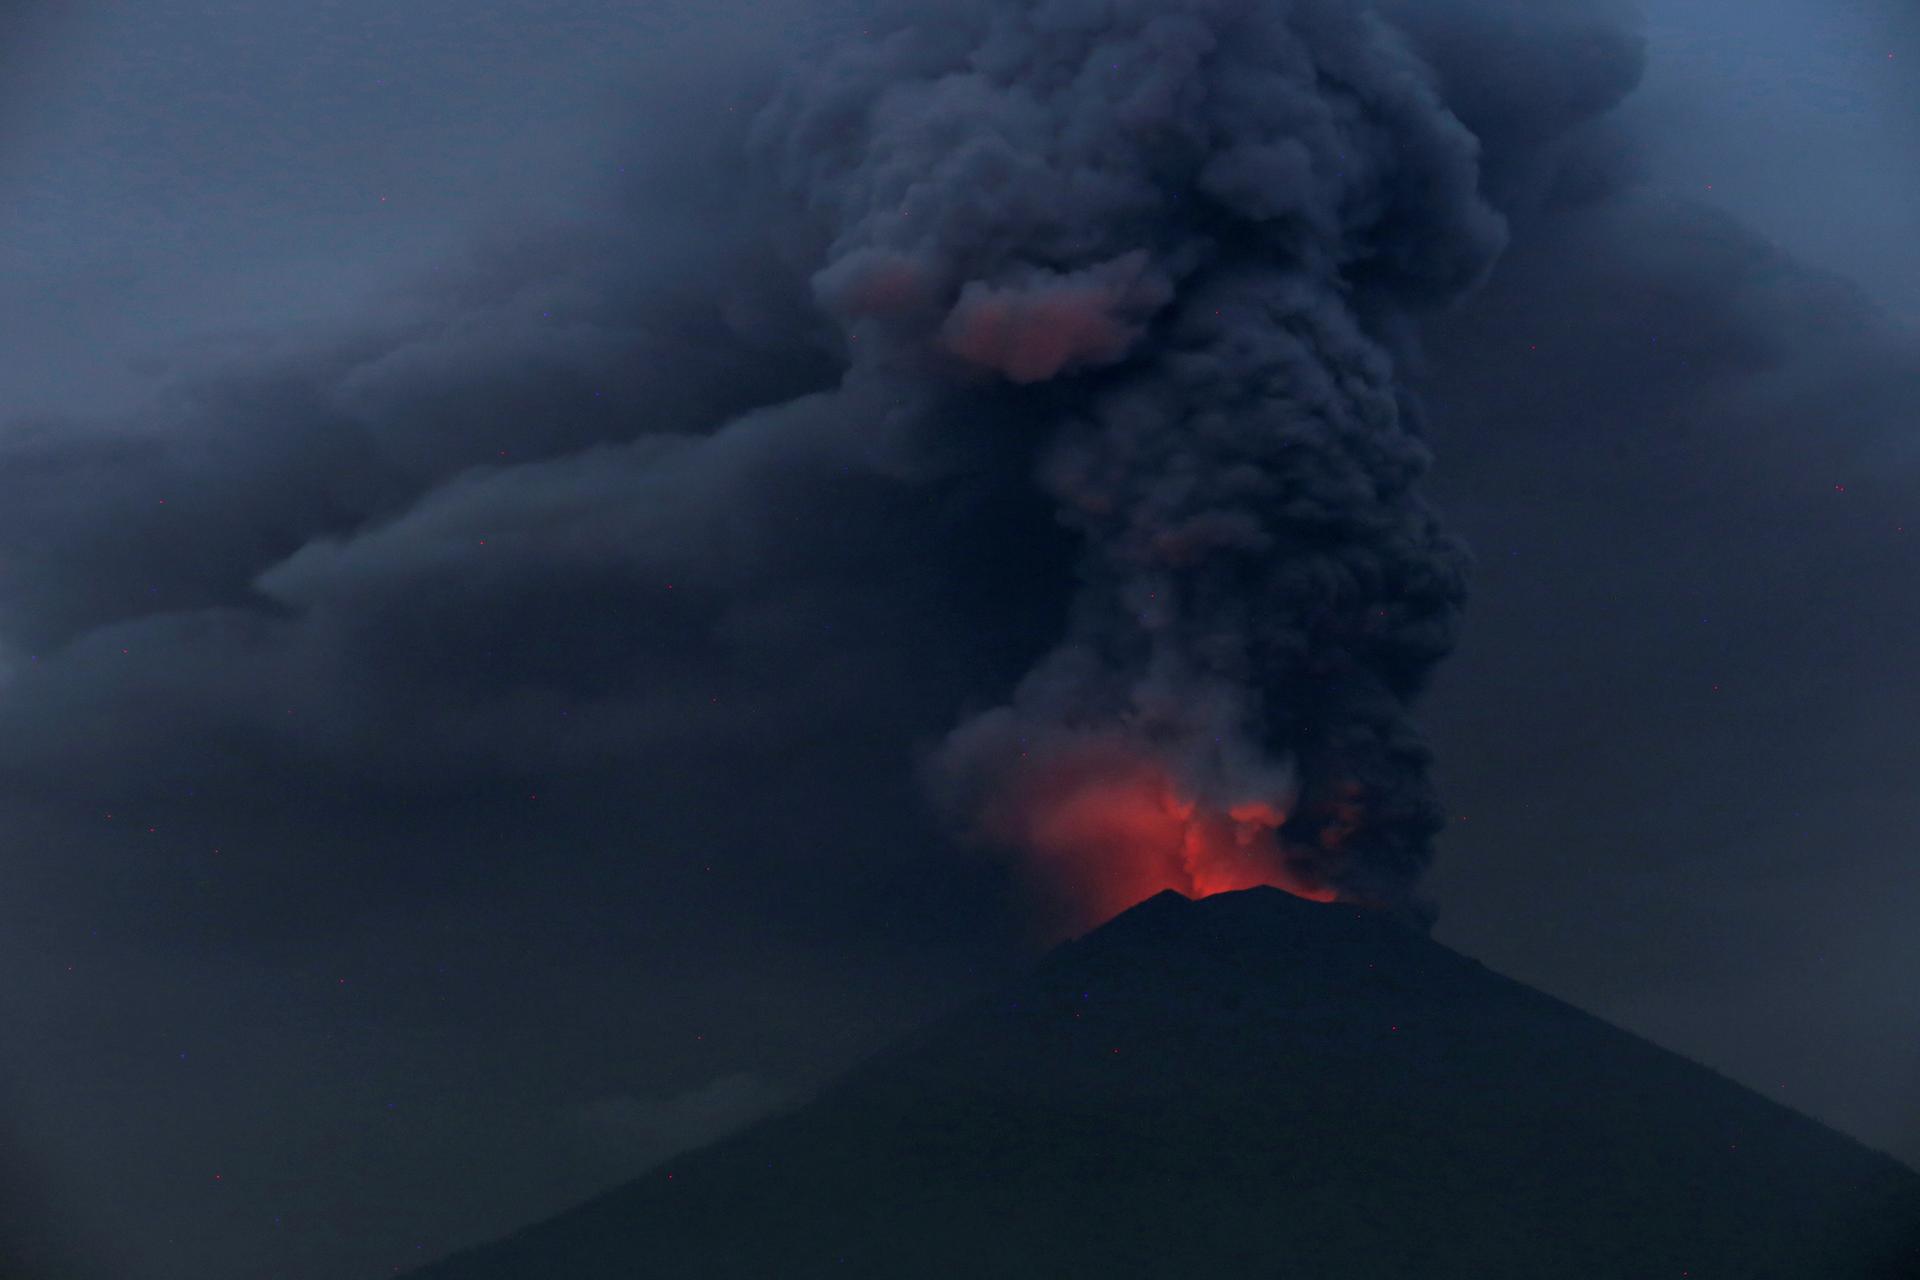 Glowing light from hot lava is seen during the eruption of Mount Agung in Bali, Indonesia, Nov. 27, 2017.